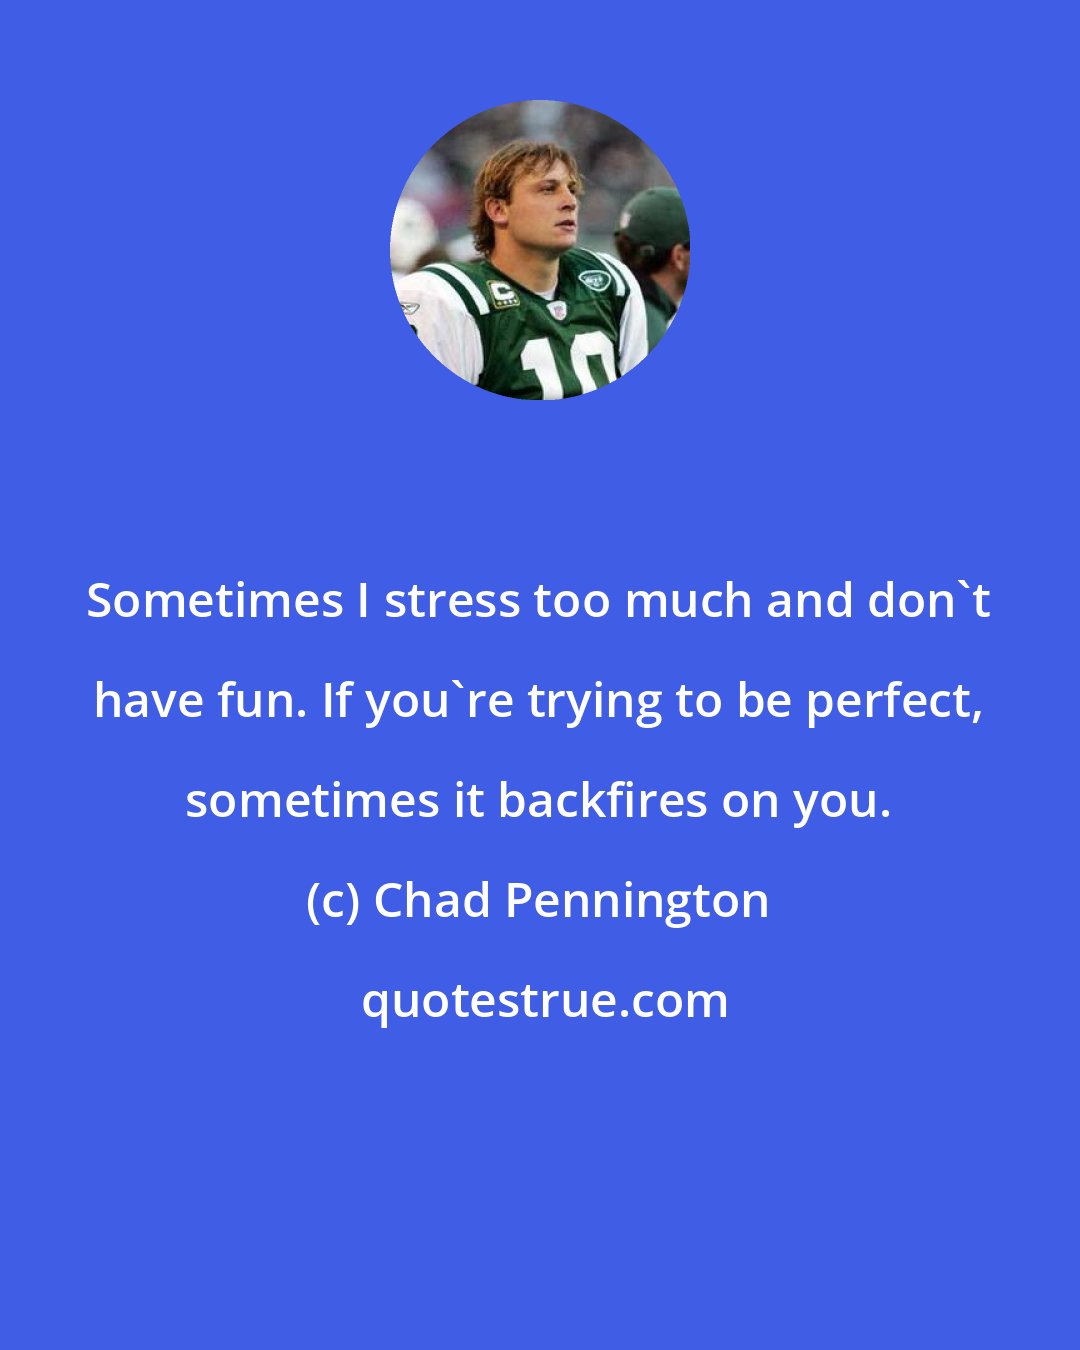 Chad Pennington: Sometimes I stress too much and don't have fun. If you're trying to be perfect, sometimes it backfires on you.